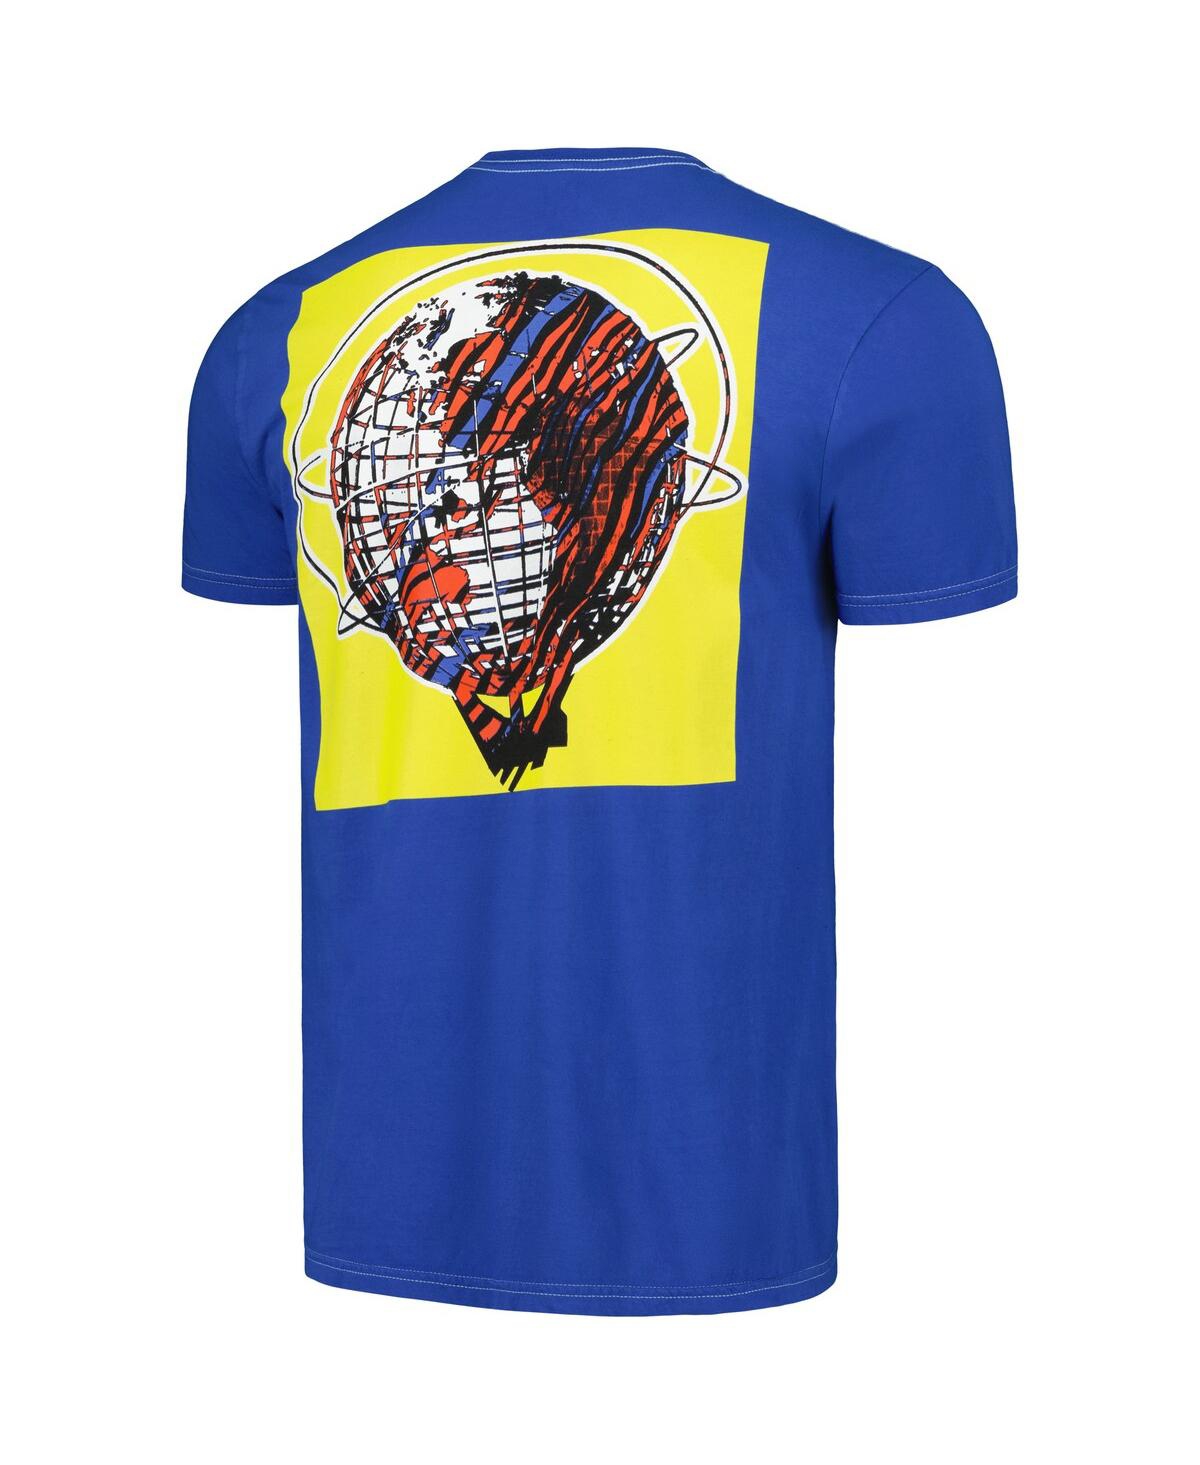 Shop Philcos Men's Blue Distressed A Tribe Called Quest Washed Graphic T-shirt